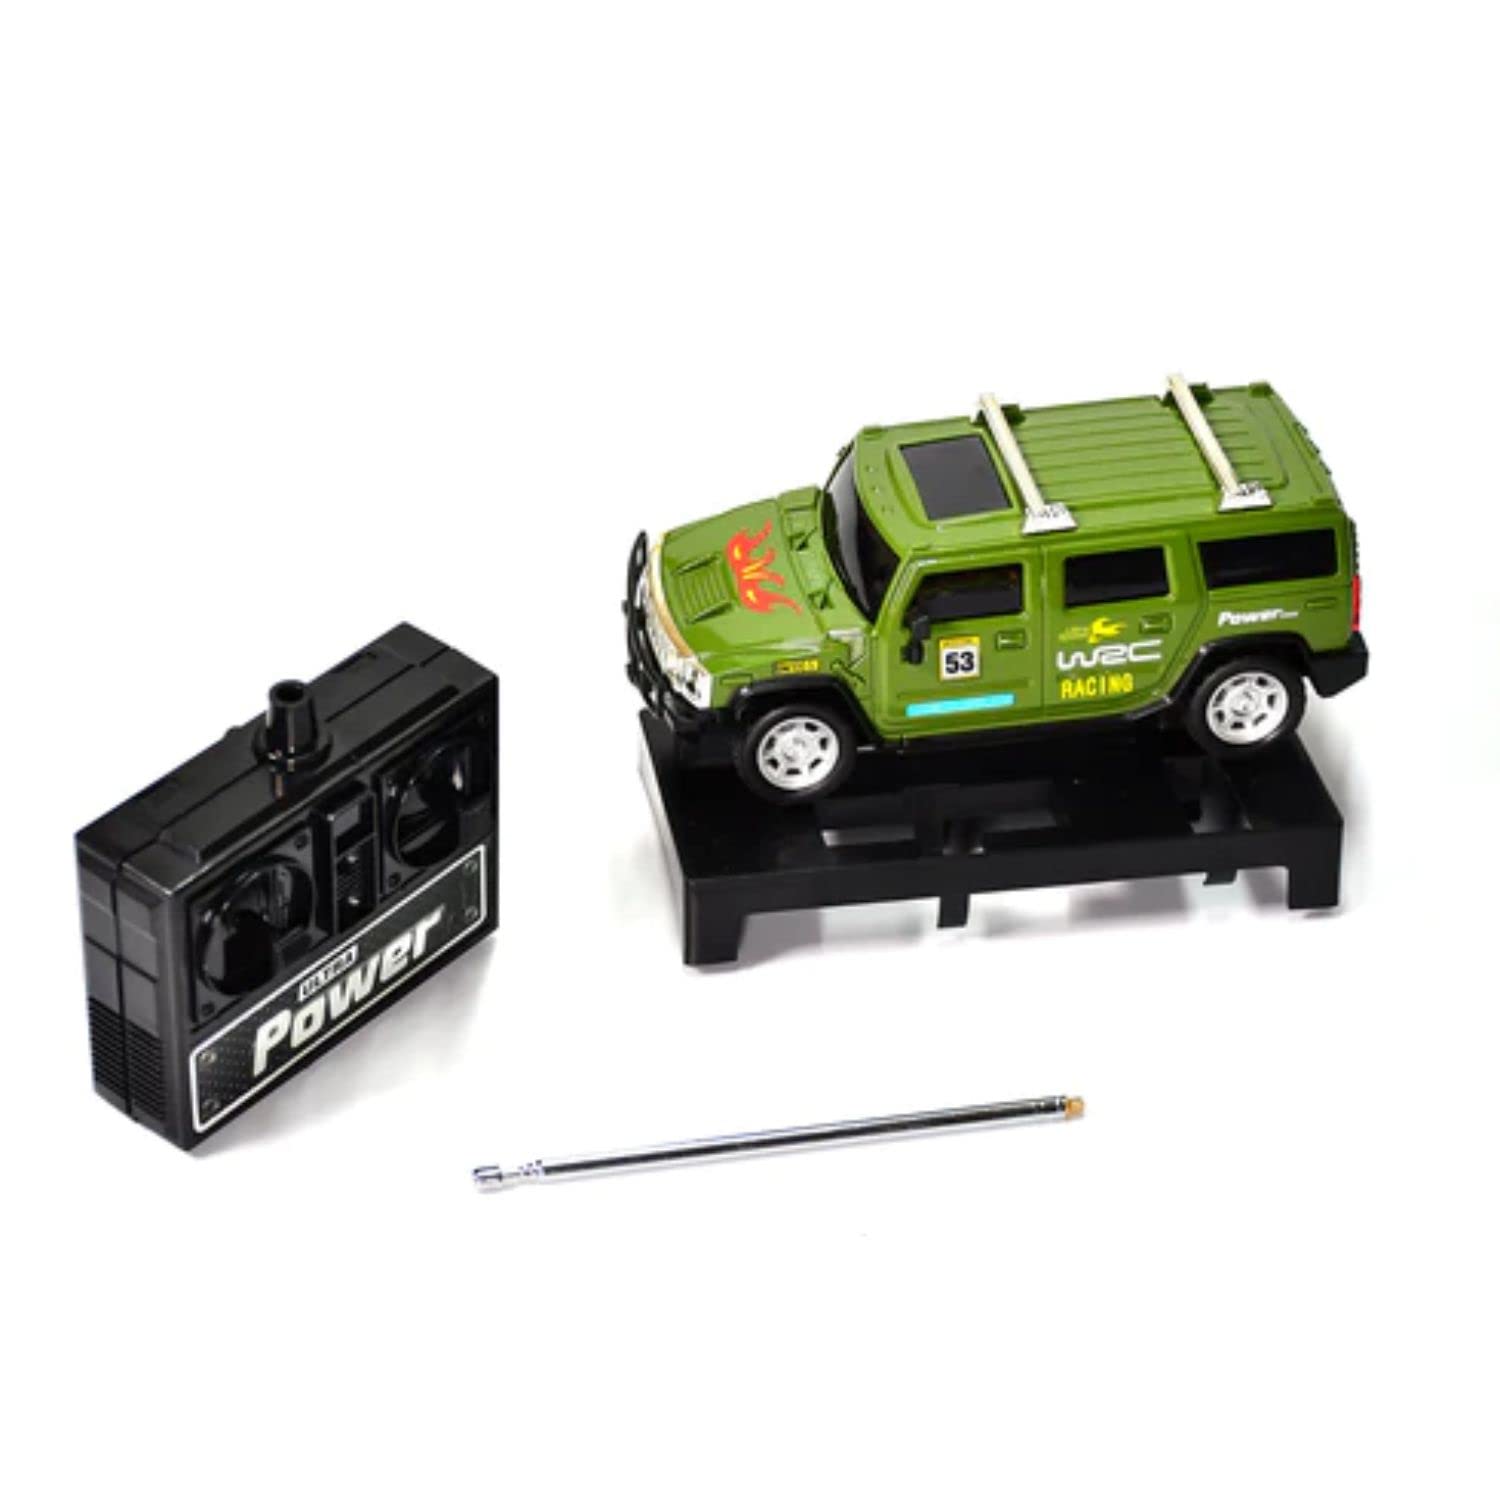 Kids Mandi off-road remote control Jeep car toy, pack of 1.